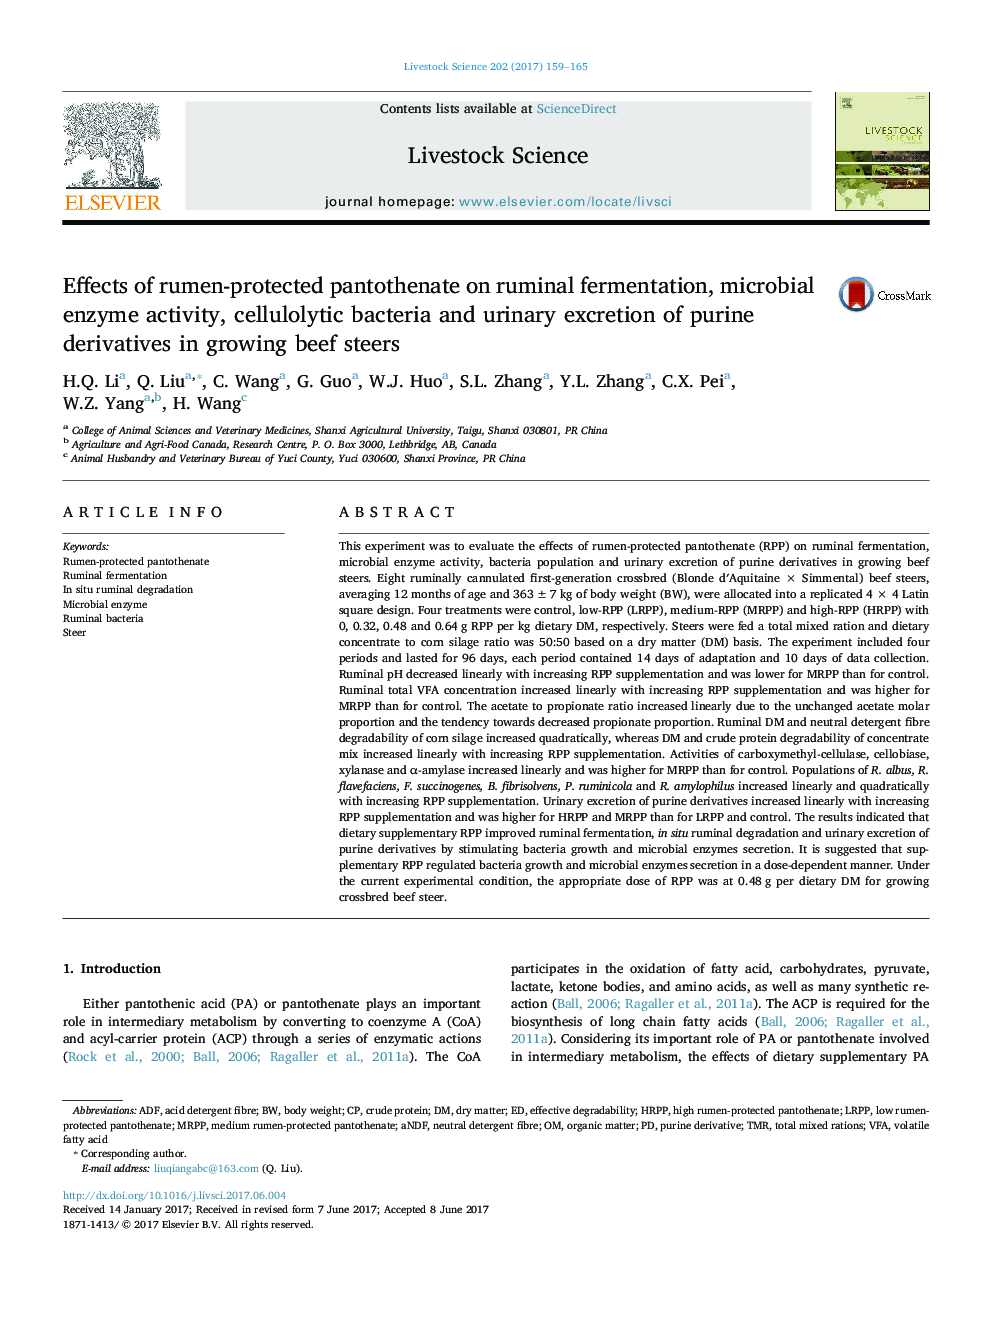 Effects of rumen-protected pantothenate on ruminal fermentation, microbial enzyme activity, cellulolytic bacteria and urinary excretion of purine derivatives in growing beef steers